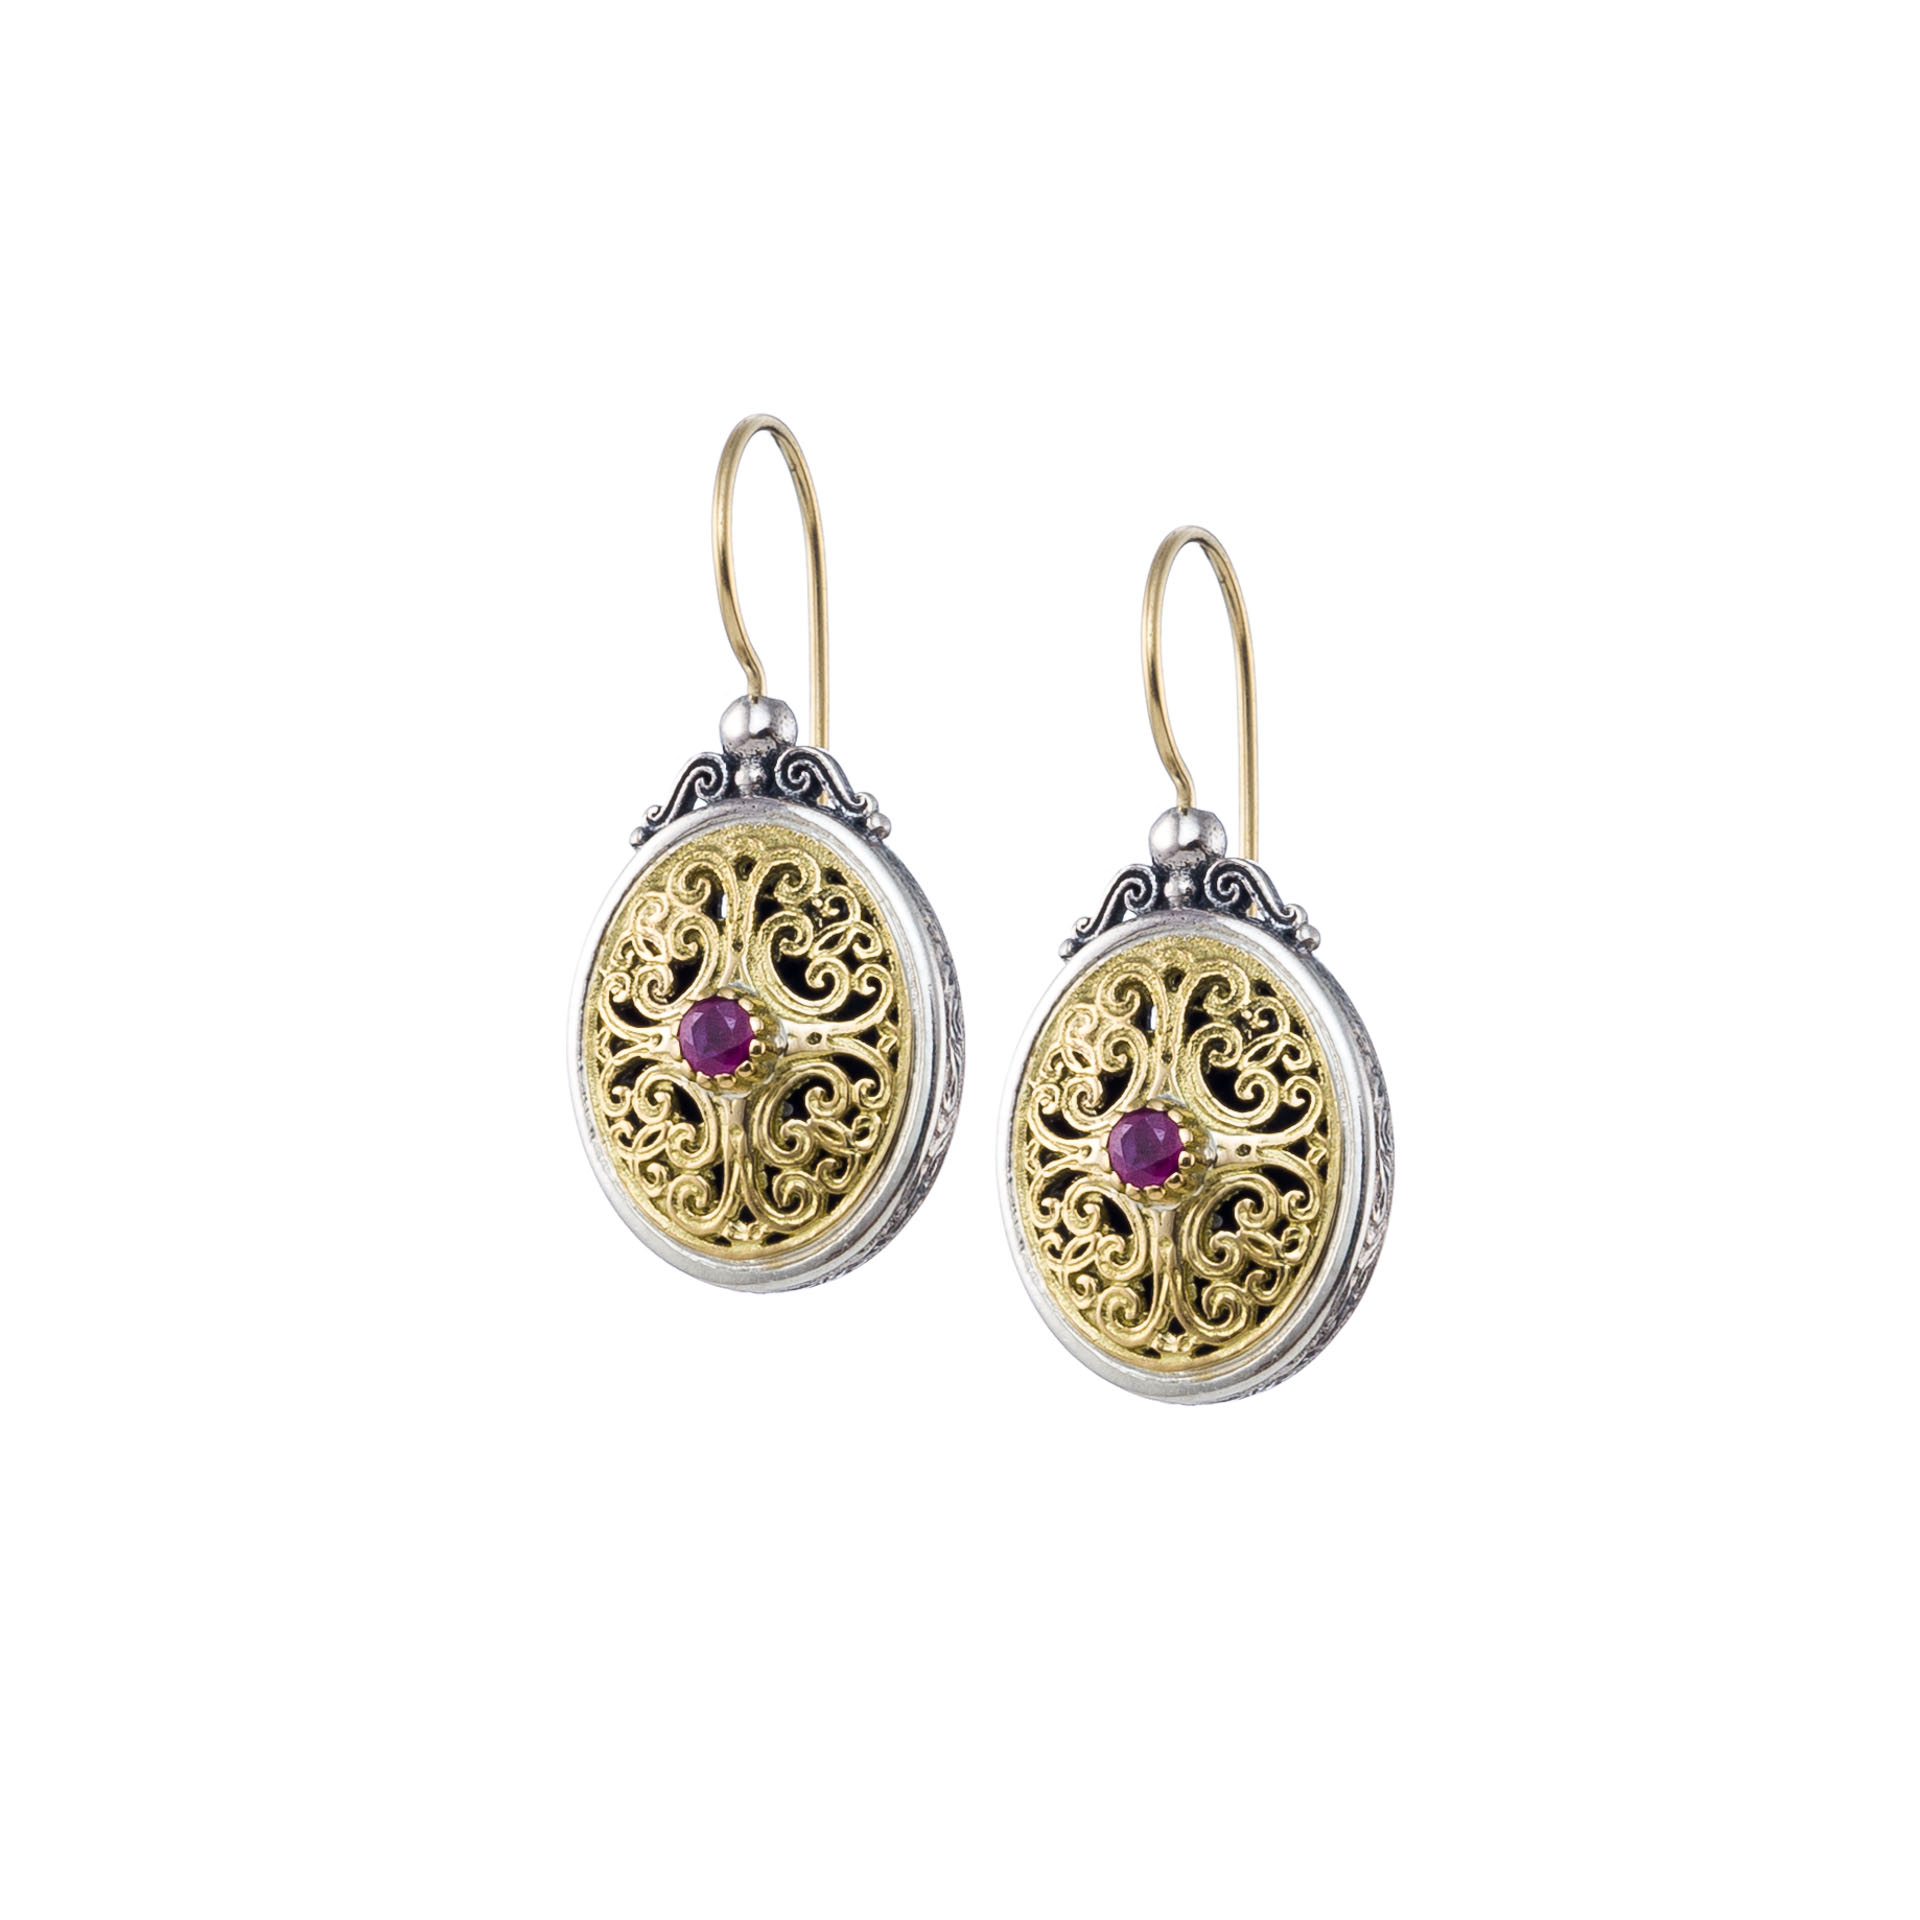 Mediterranean oval earrings in 18K Gold and  Sterling silver with ruby